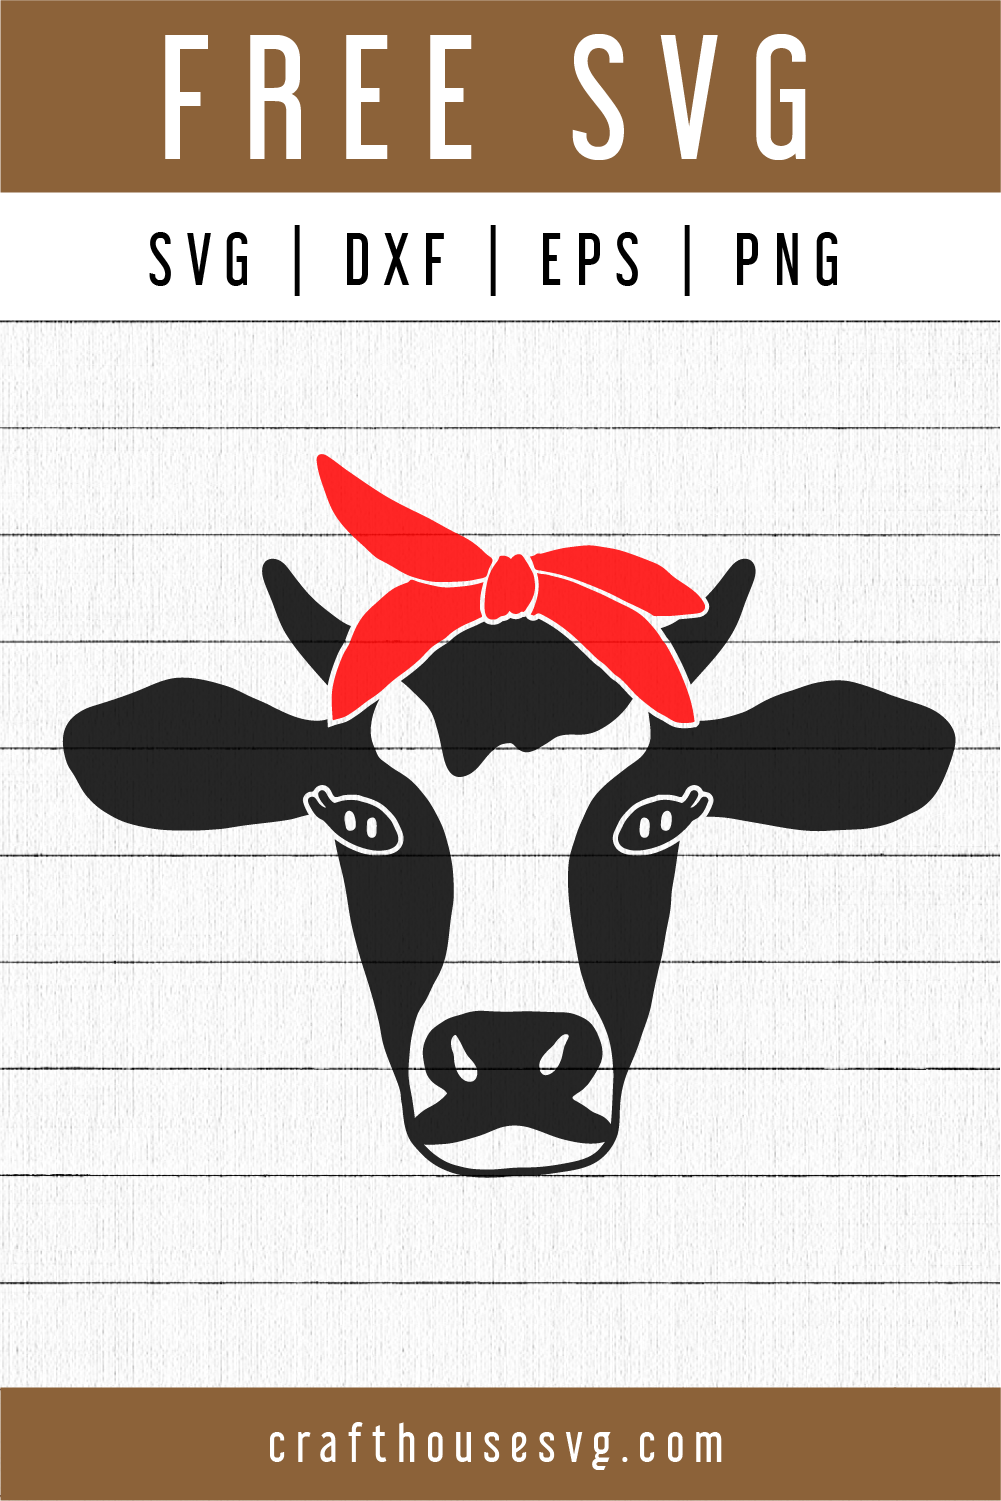 Download FREE Cow SVG - Cow bandana SVG - Craft House SVG